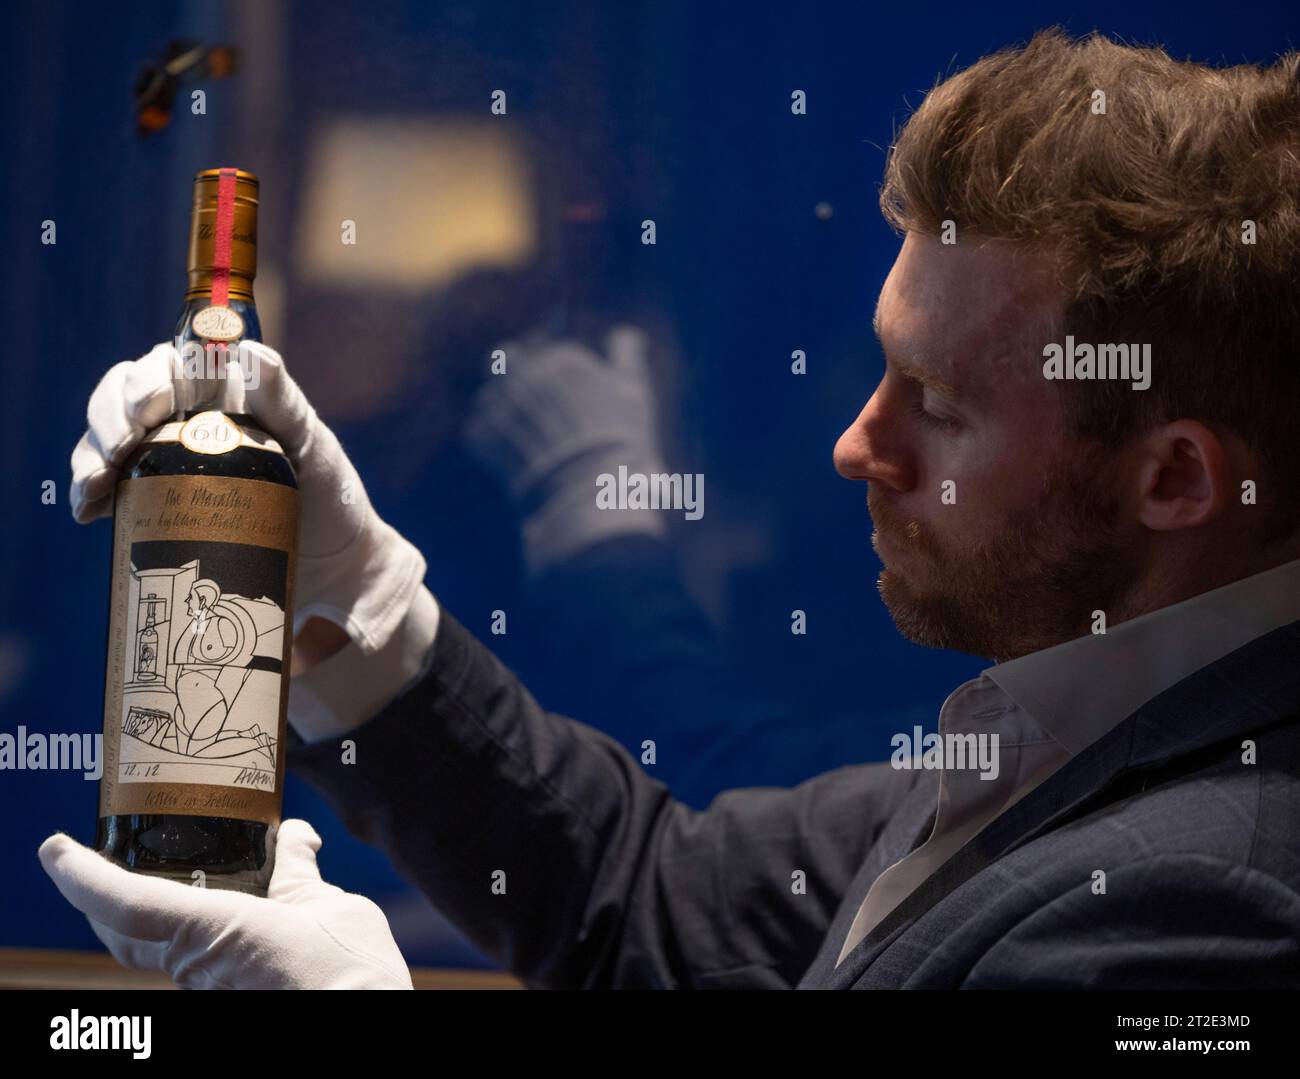 The Macallan Adami 1926 becomes most expensive bottle of whisky